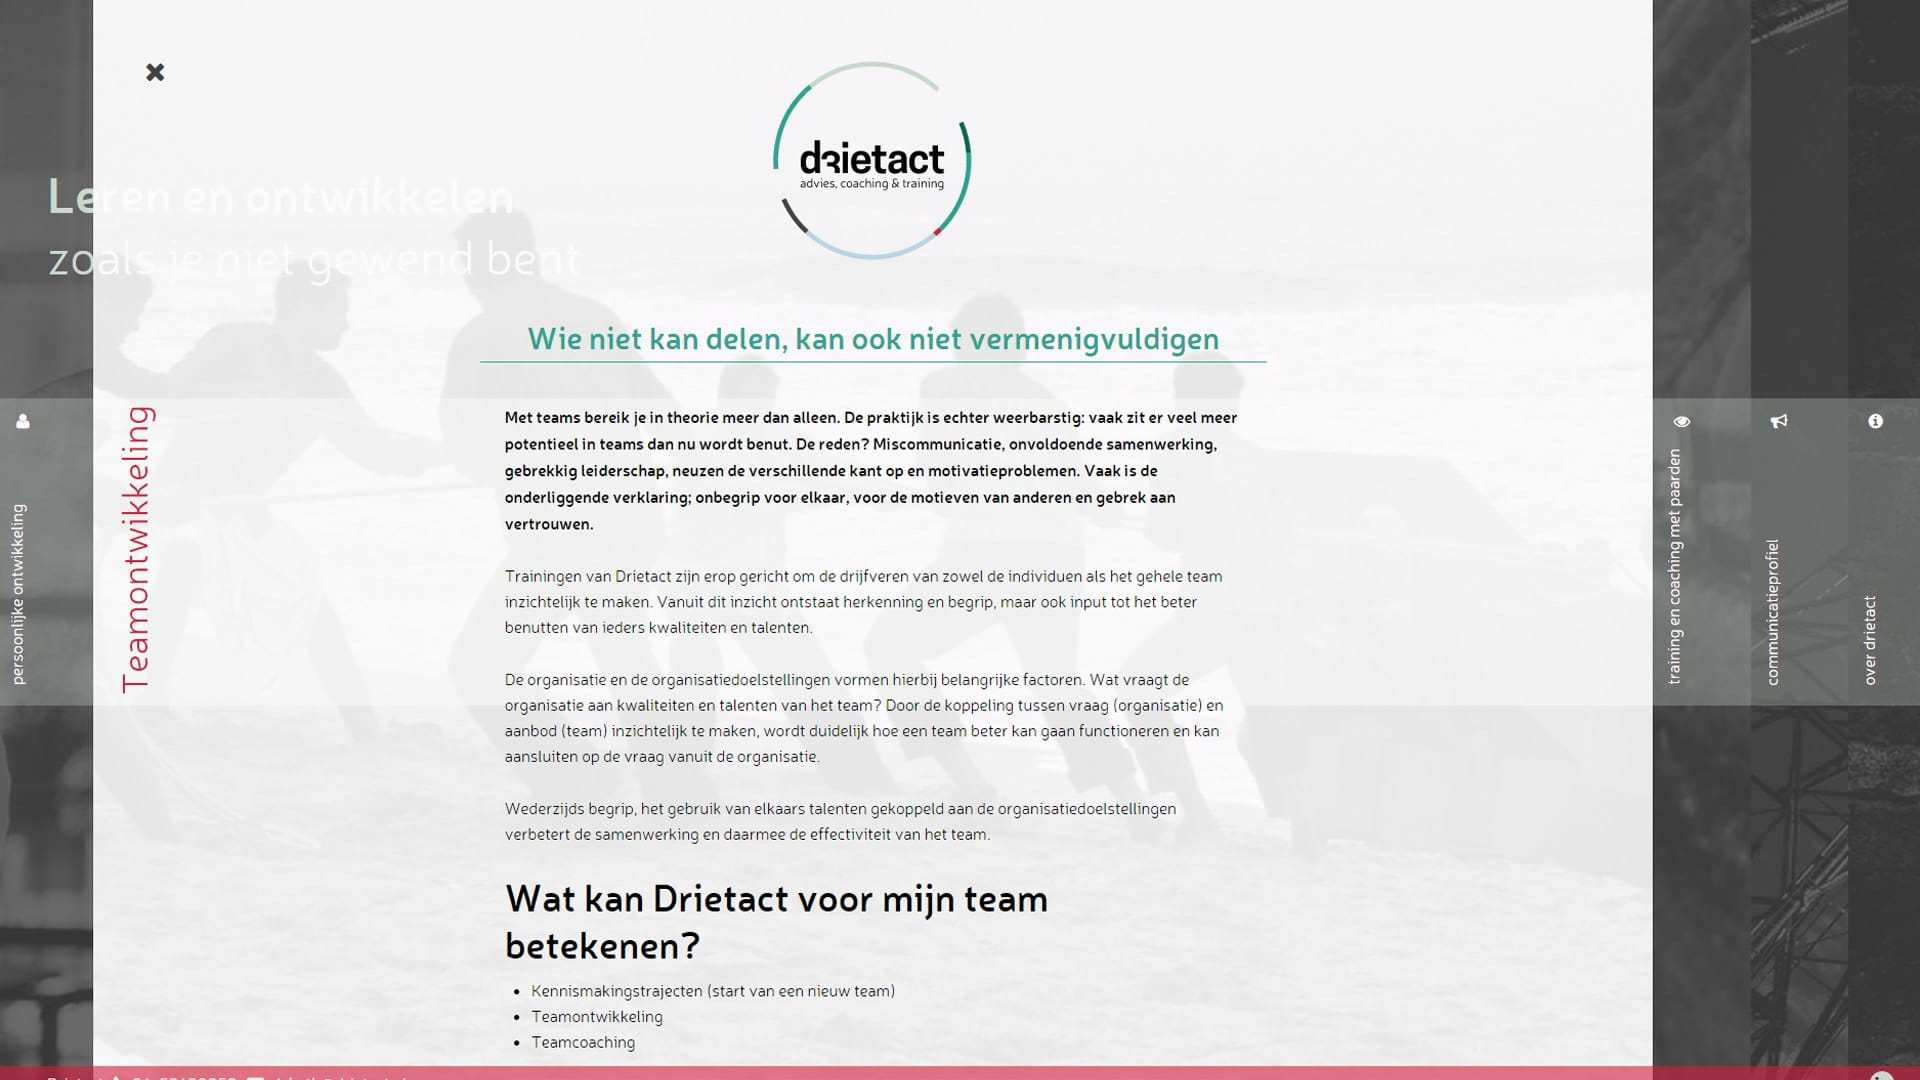 Content on Drietact.nl as developed by Michiel Tramper and designed by Tineke van Lindenberg